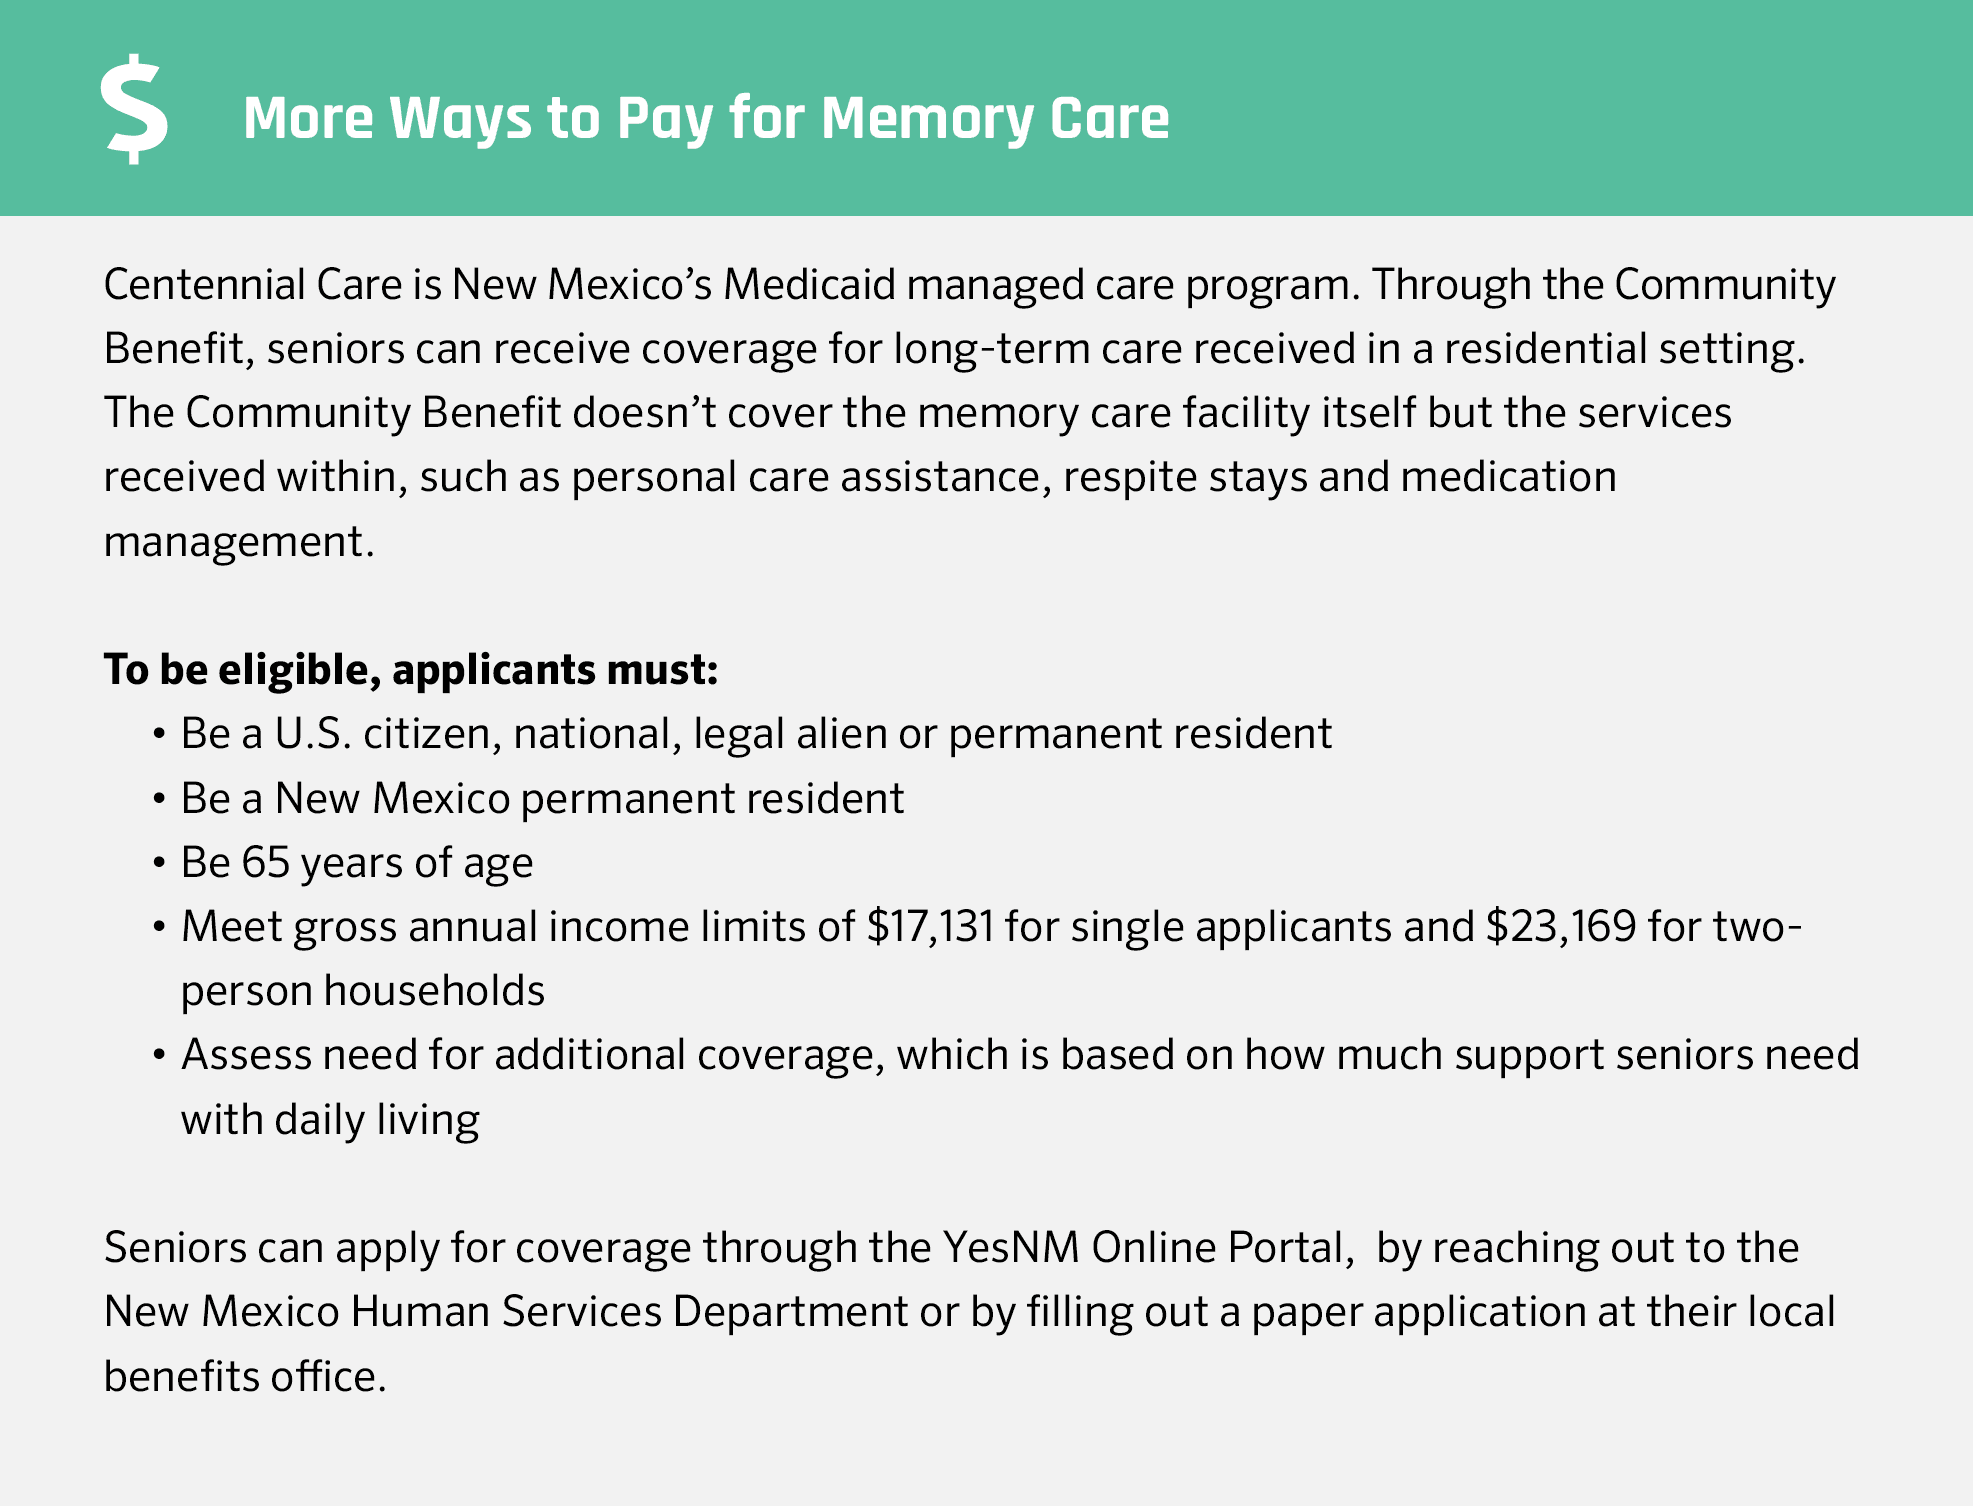 More ways to pay for memory care in New Mexico